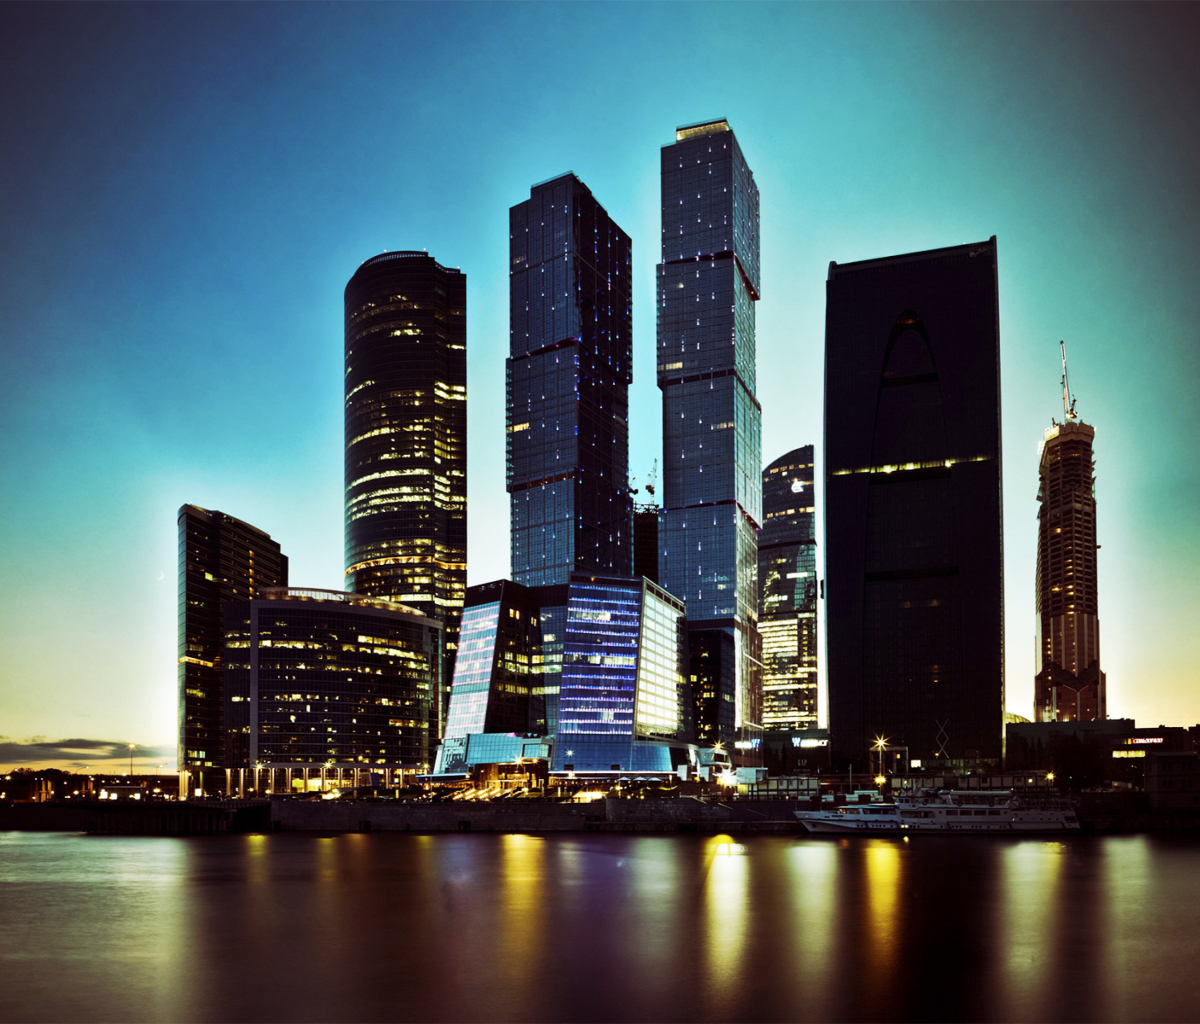 Moscow City Skyscrapers screenshot #1 1200x1024